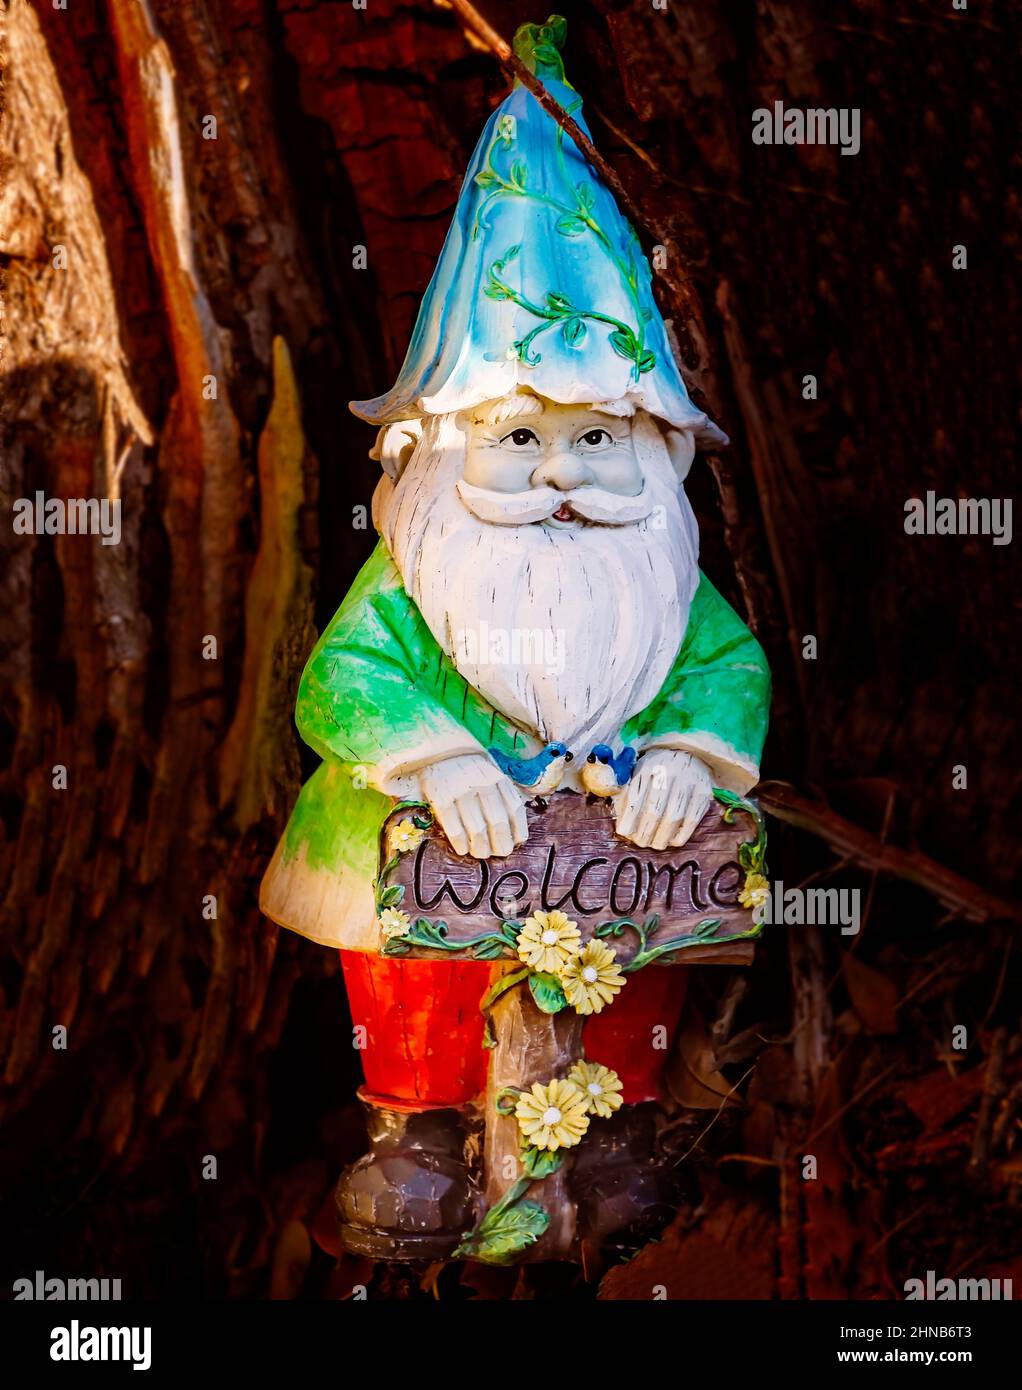 A garden gnome stands at the base of a tree, Feb. 9, 2022, in Dauphin Island, Alabama. Stock Photo